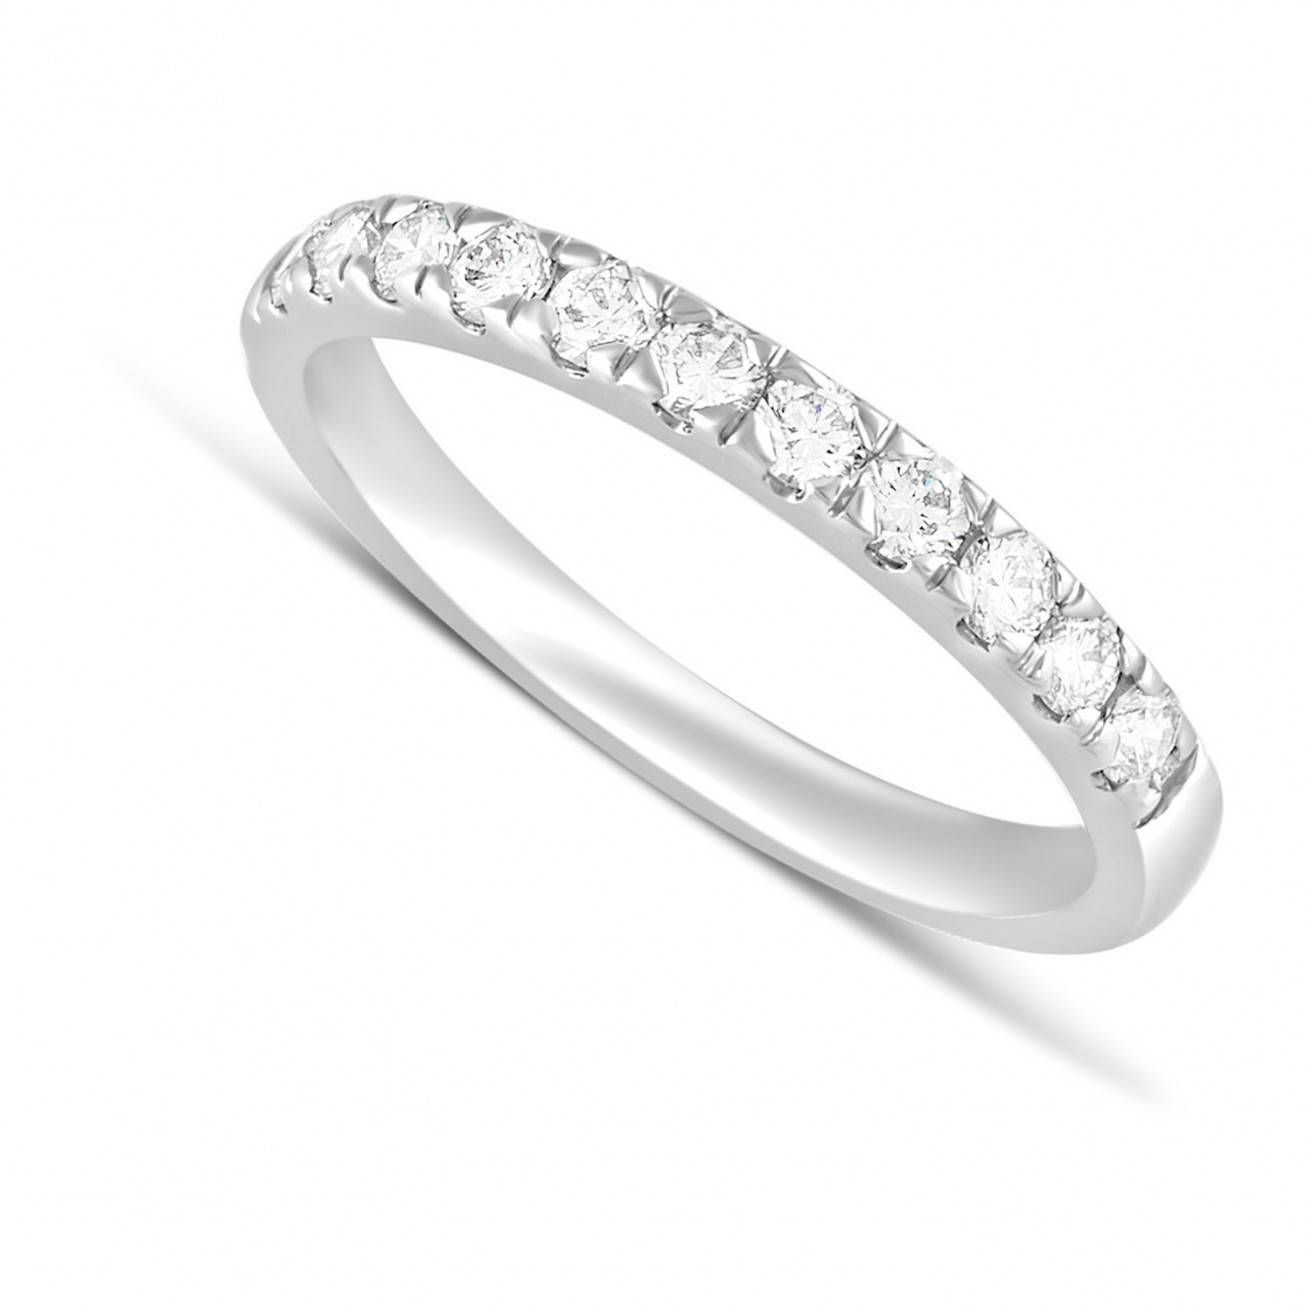 Buy Platinum Wedding Bands Online – Fraser Hart Throughout Wedding Rings With Platinum Diamond (View 11 of 15)